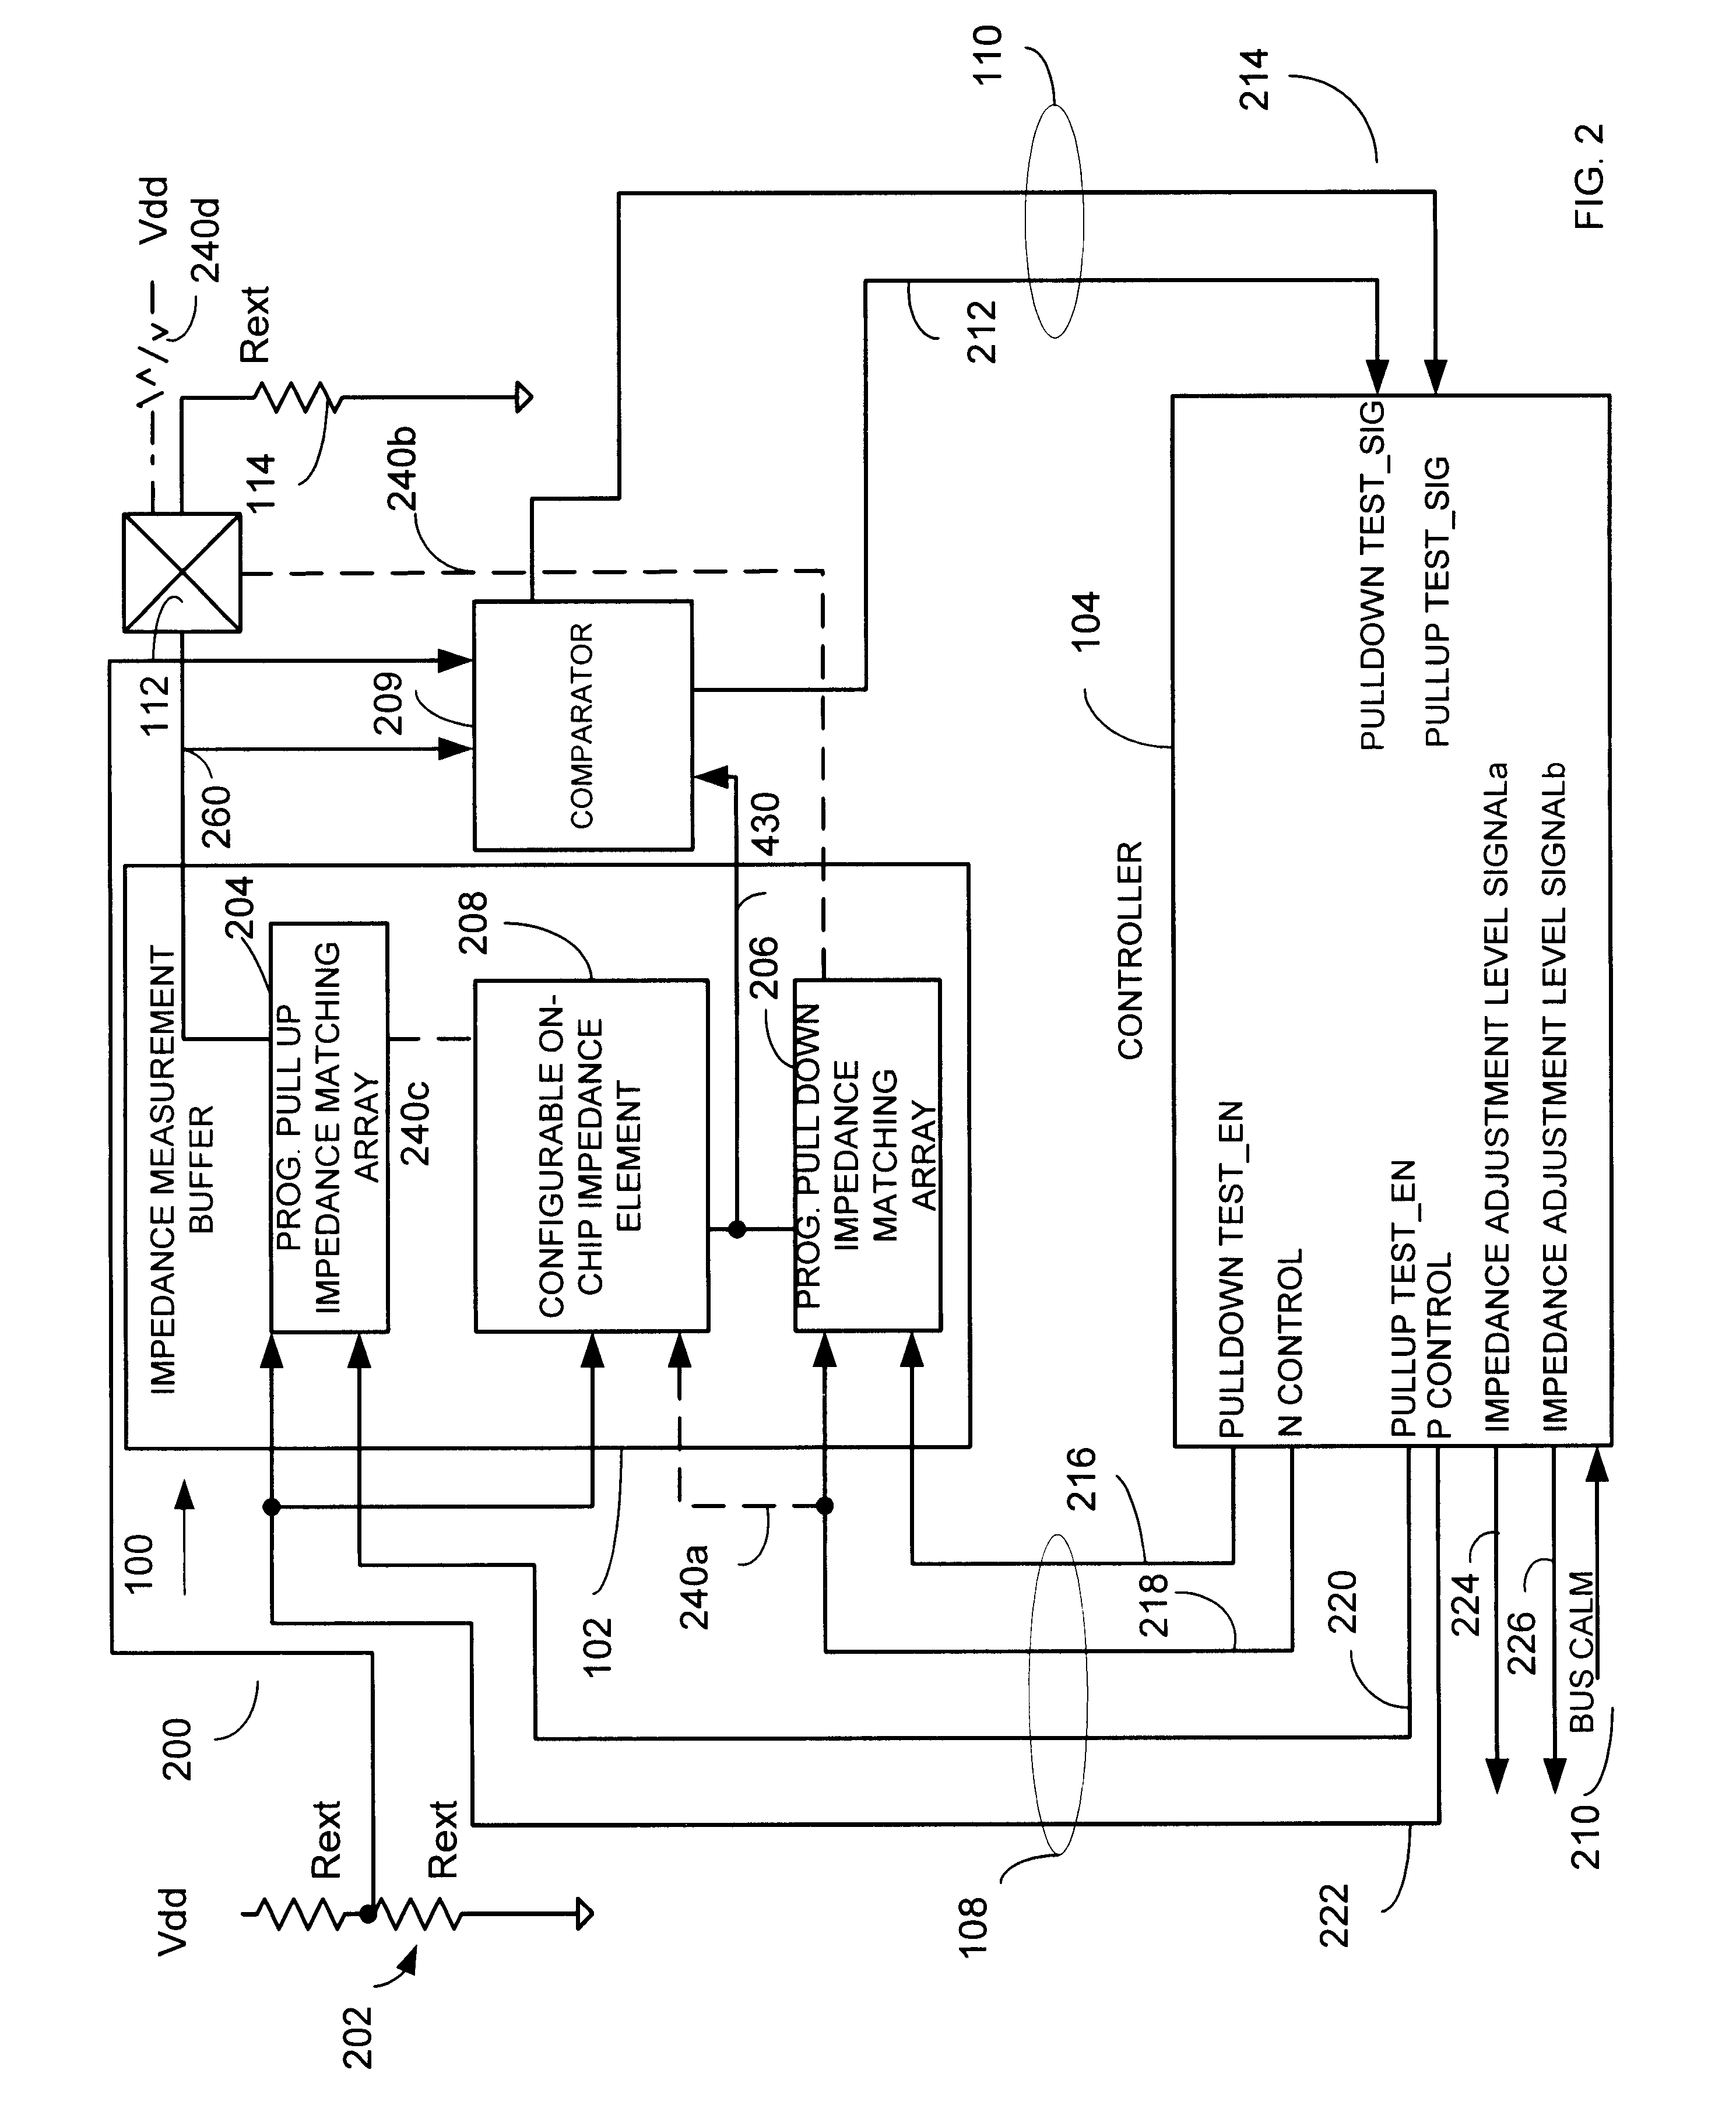 Dynamic impedance compensation circuit and method